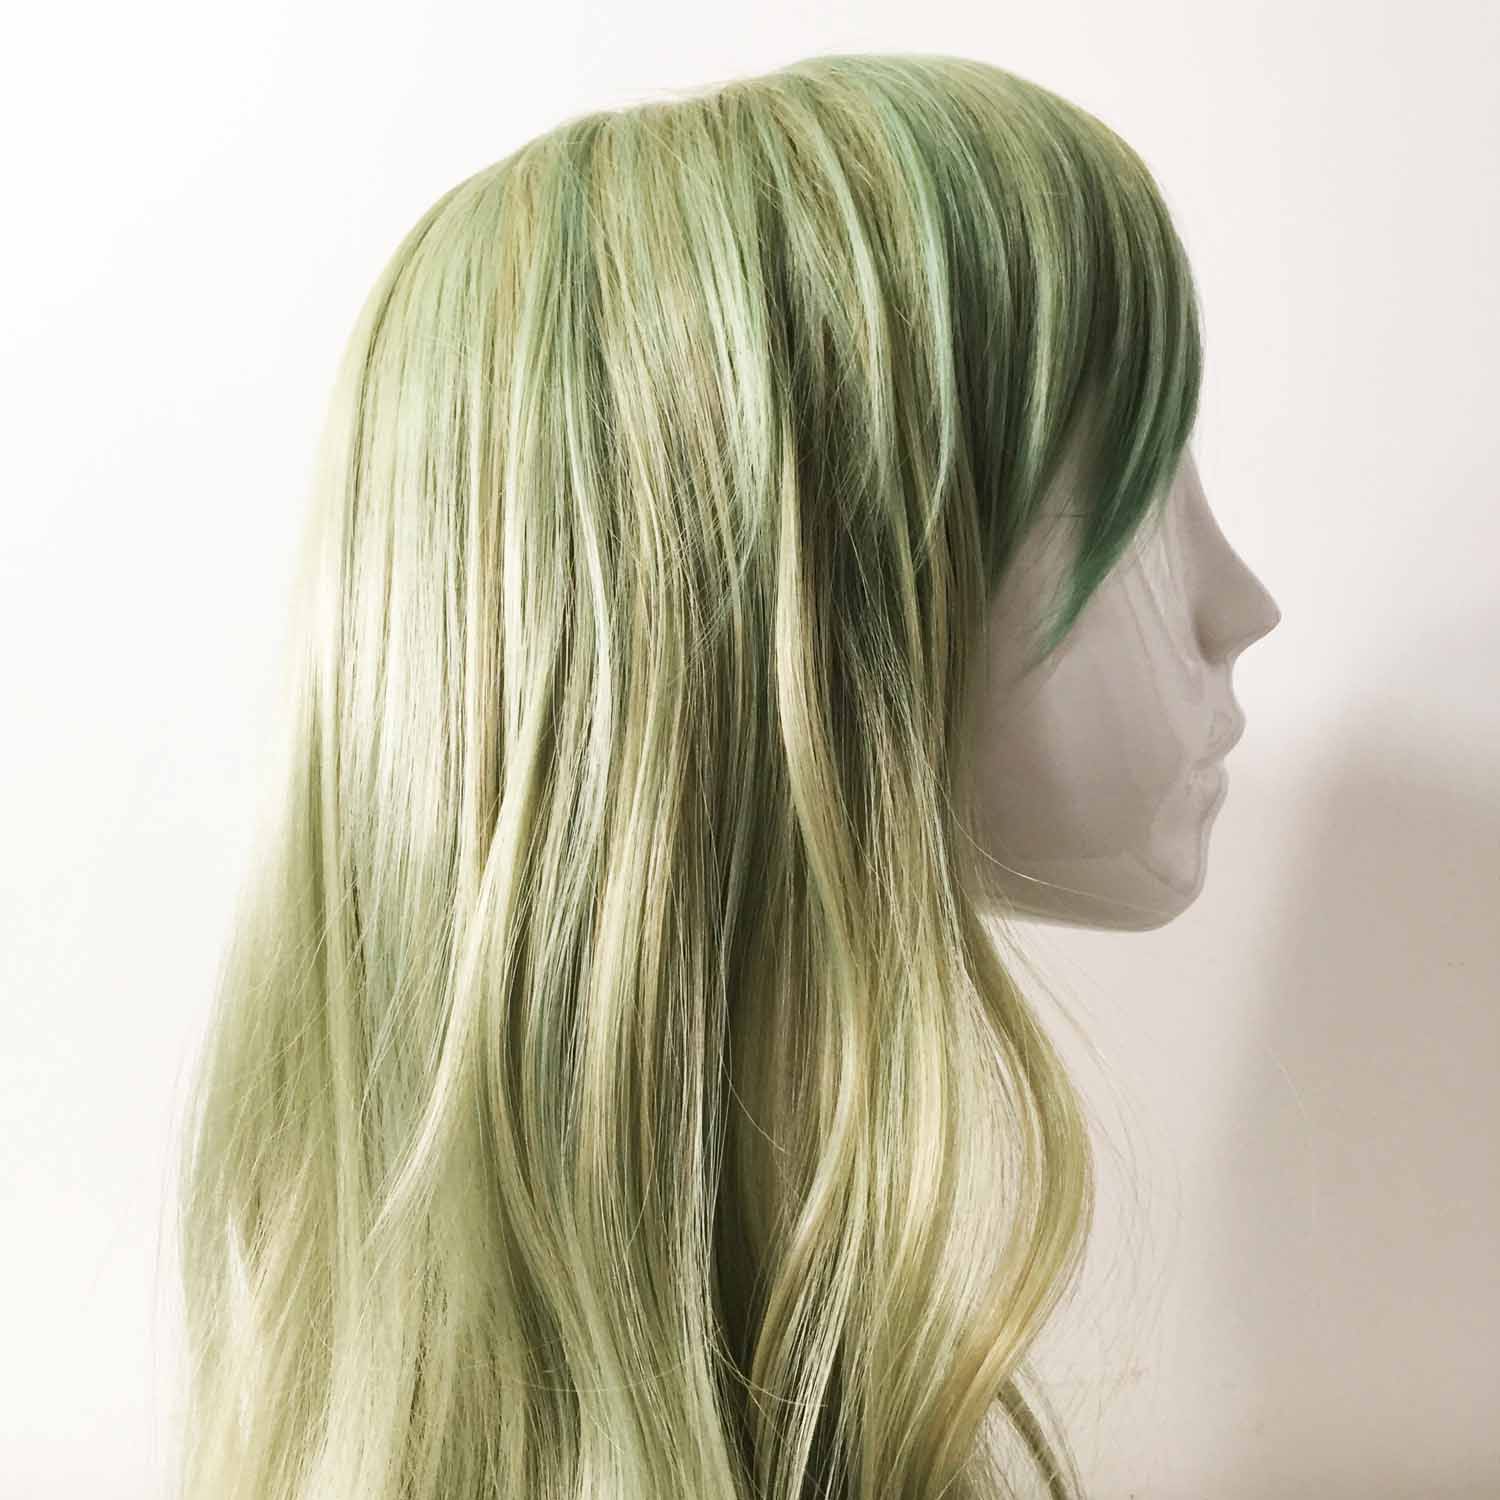 nevermindyrhead Women Green Ombre Long Straight Fringe Bangs Cosplay Wig